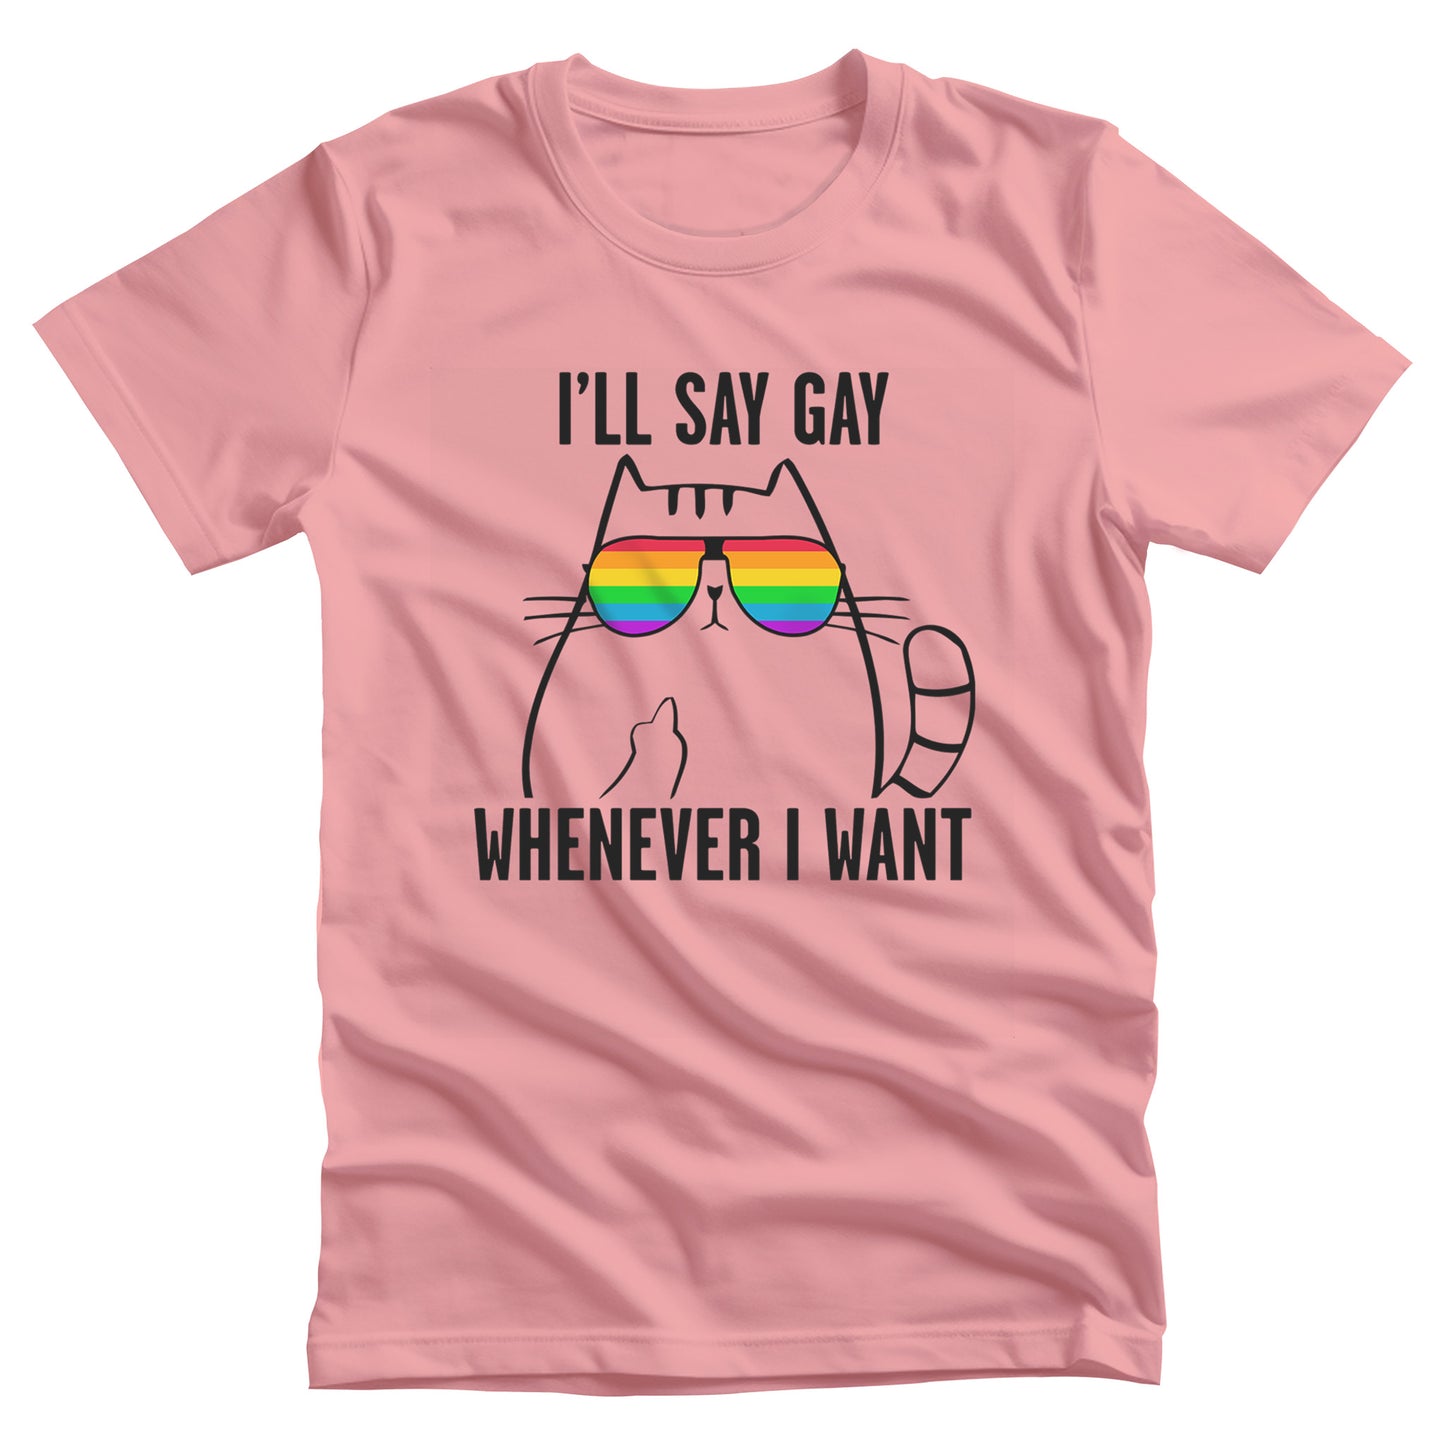 Pink unisex t-shirt with a graphic of a cat wearing rainbow sunglasses. The text says, “I’ll Say Gay Whenever I Want” with the words “I’ll say gay” above the graphic and the rest of the text below the graphic. The cat is also holding up its middle finger.